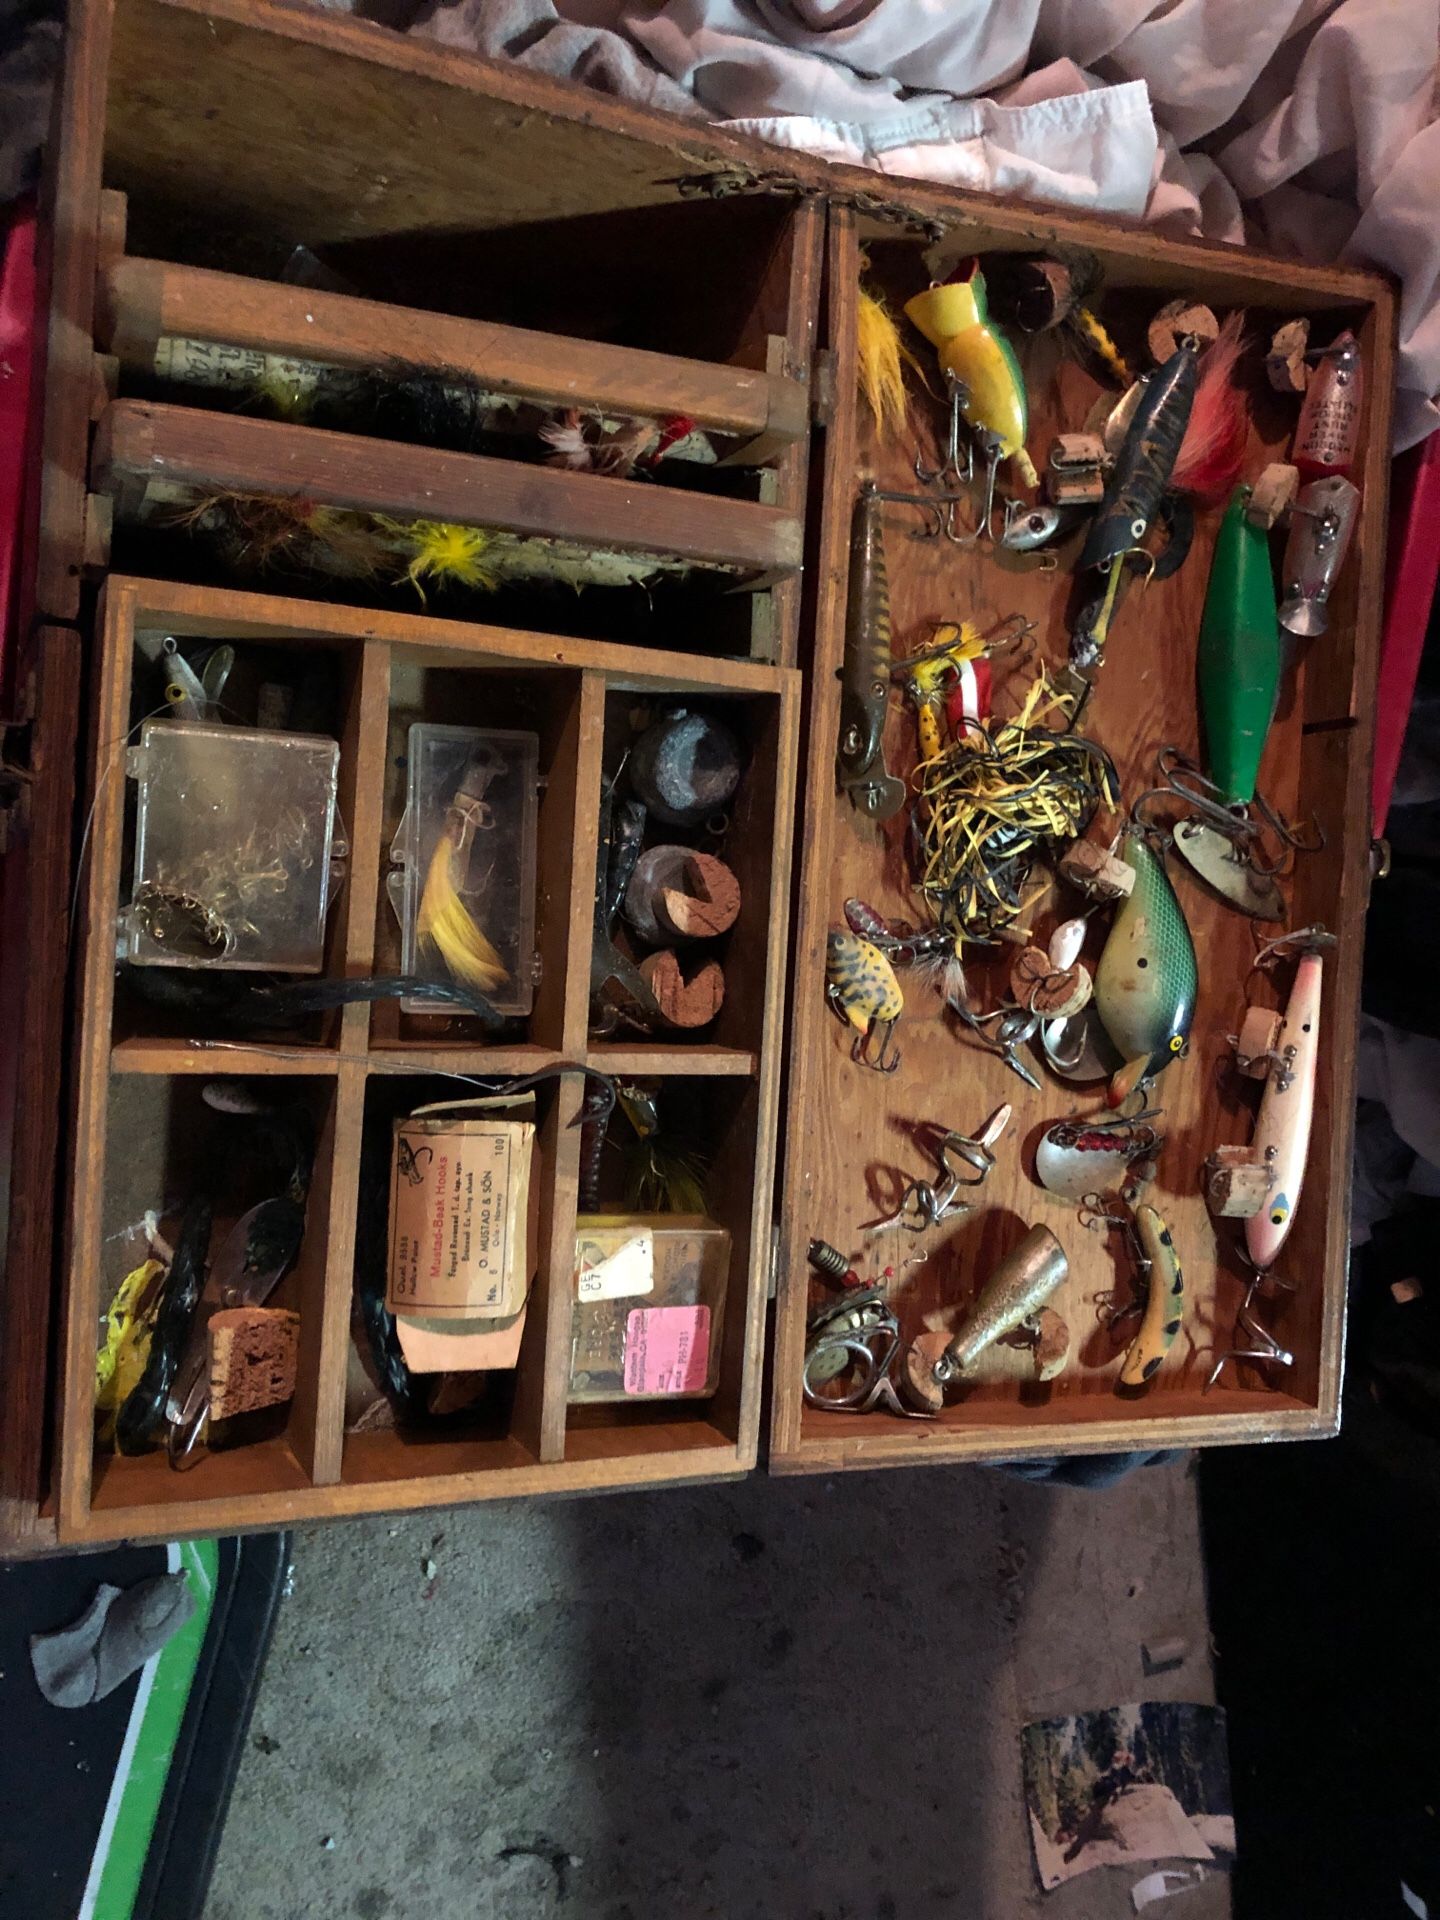 Fishing equipment plus a unique wooden tackle box and two rods